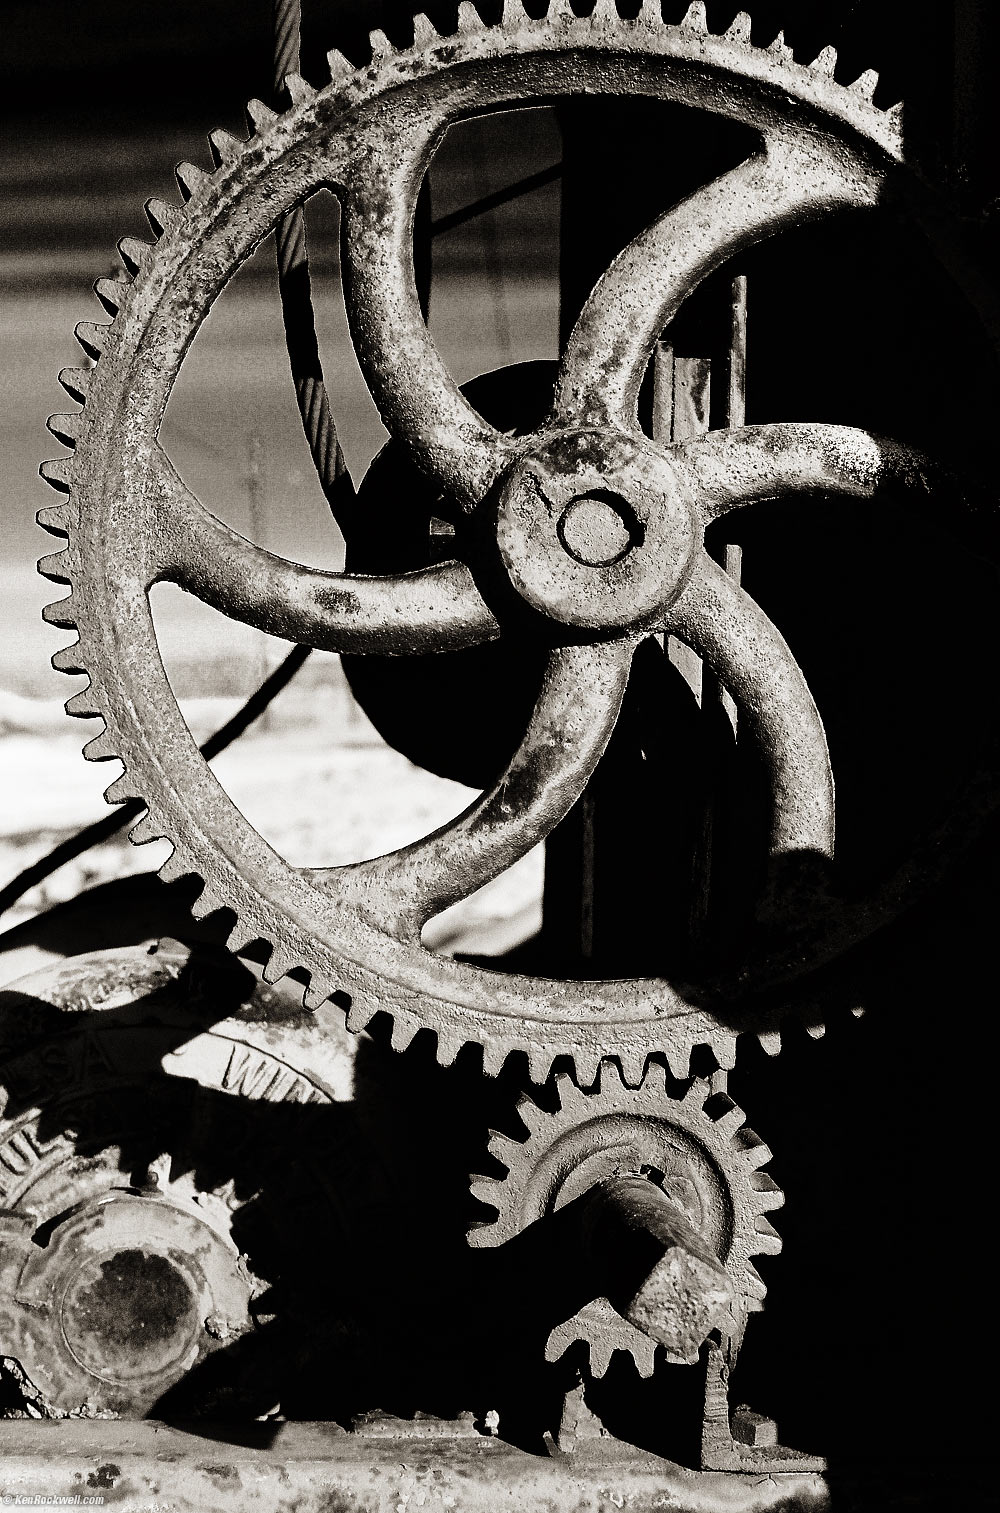 Gears in black and white